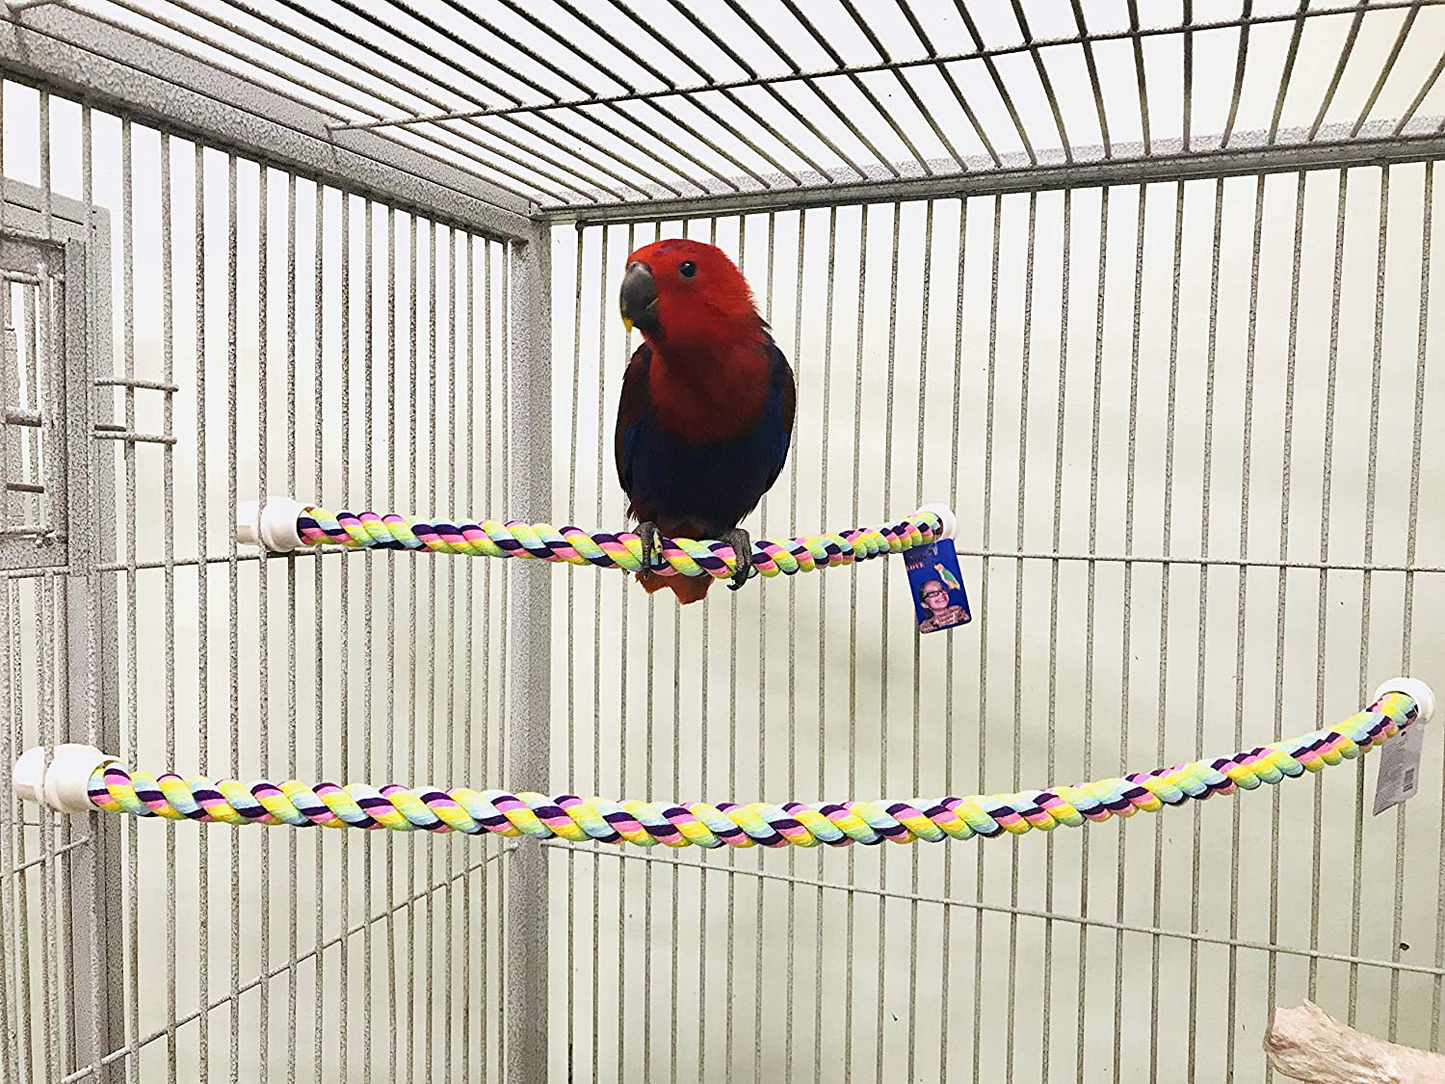 Birds LOVE Cotton Rope Comfy Cable Perches for Bird Cages - Choose the Right Size for Your Bird